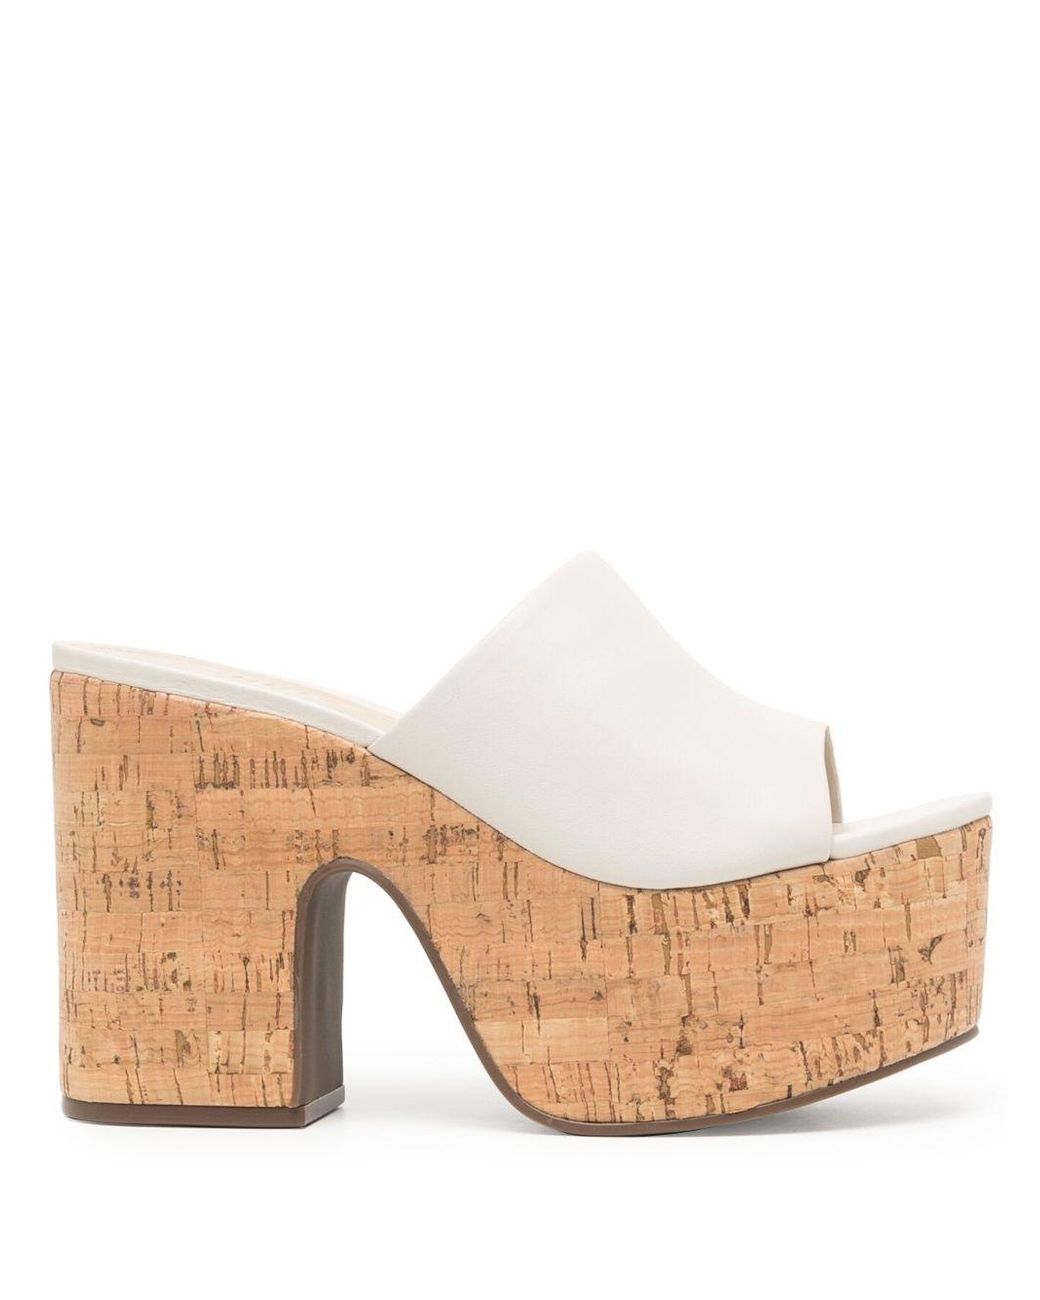 SCHUTZ SHOES 120mm Wedge Sandals in Natural | Lyst